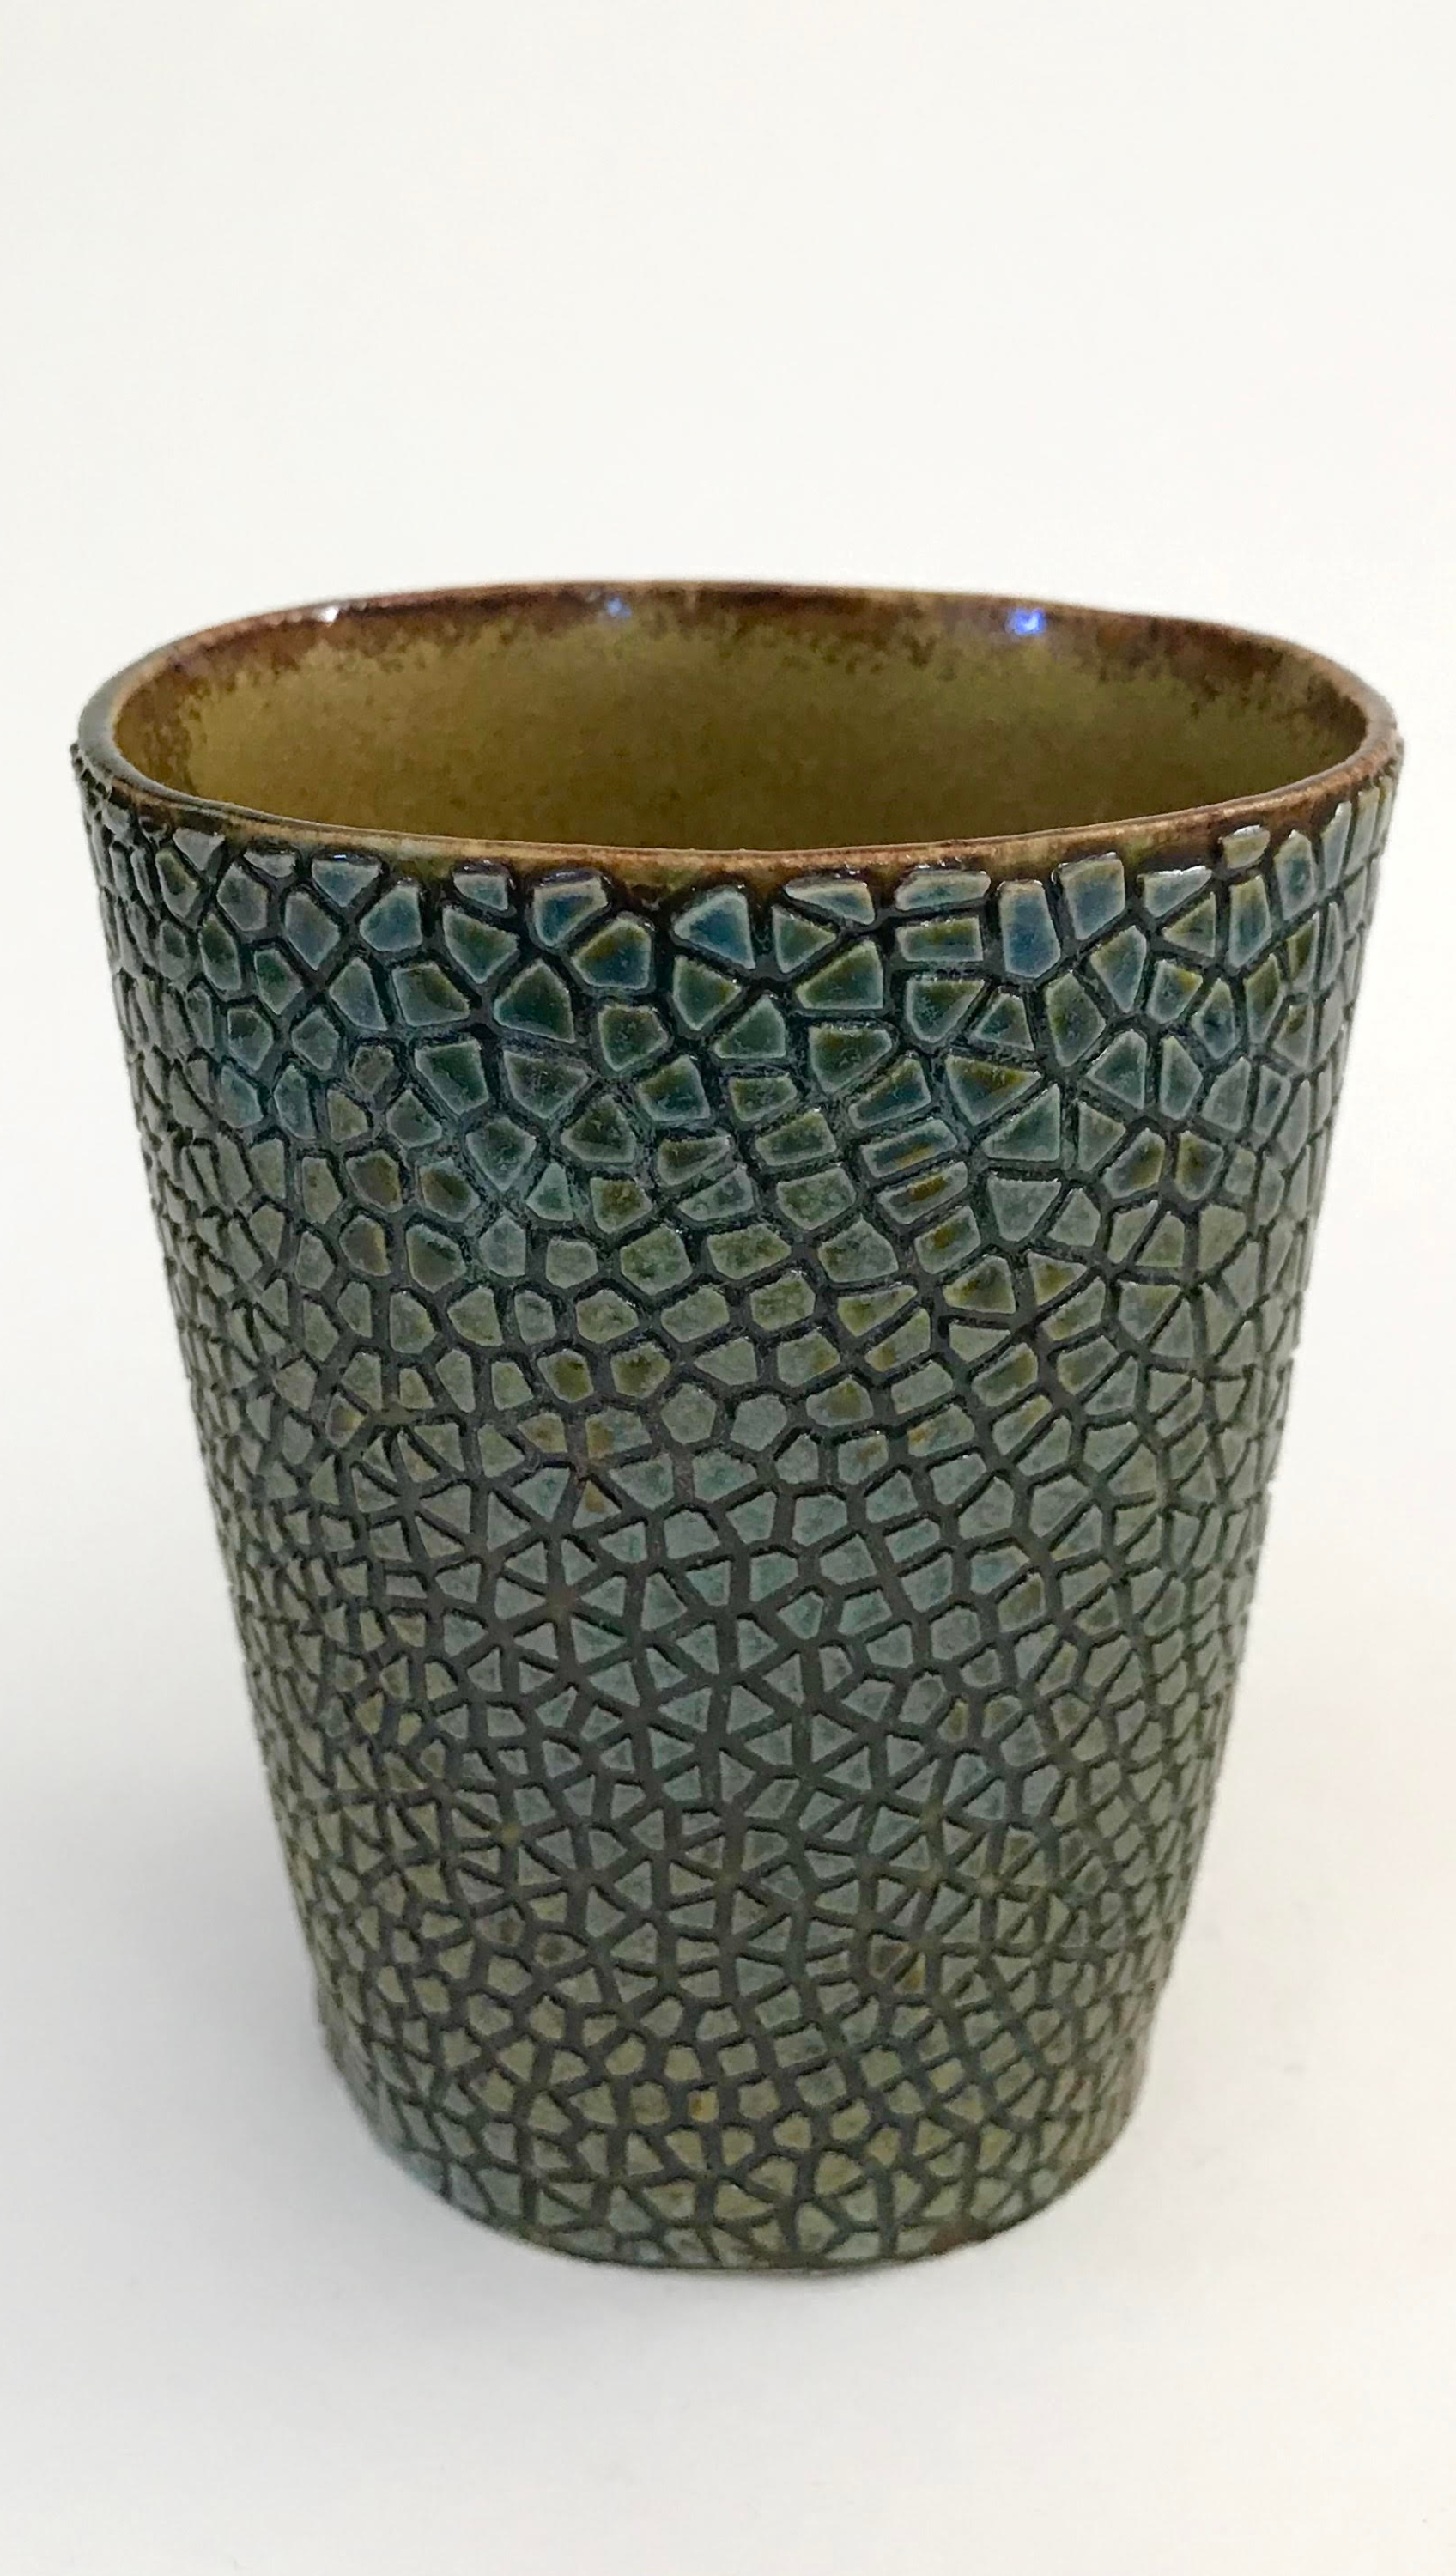 a clay cup with a fragmented skin made of intersecting lines